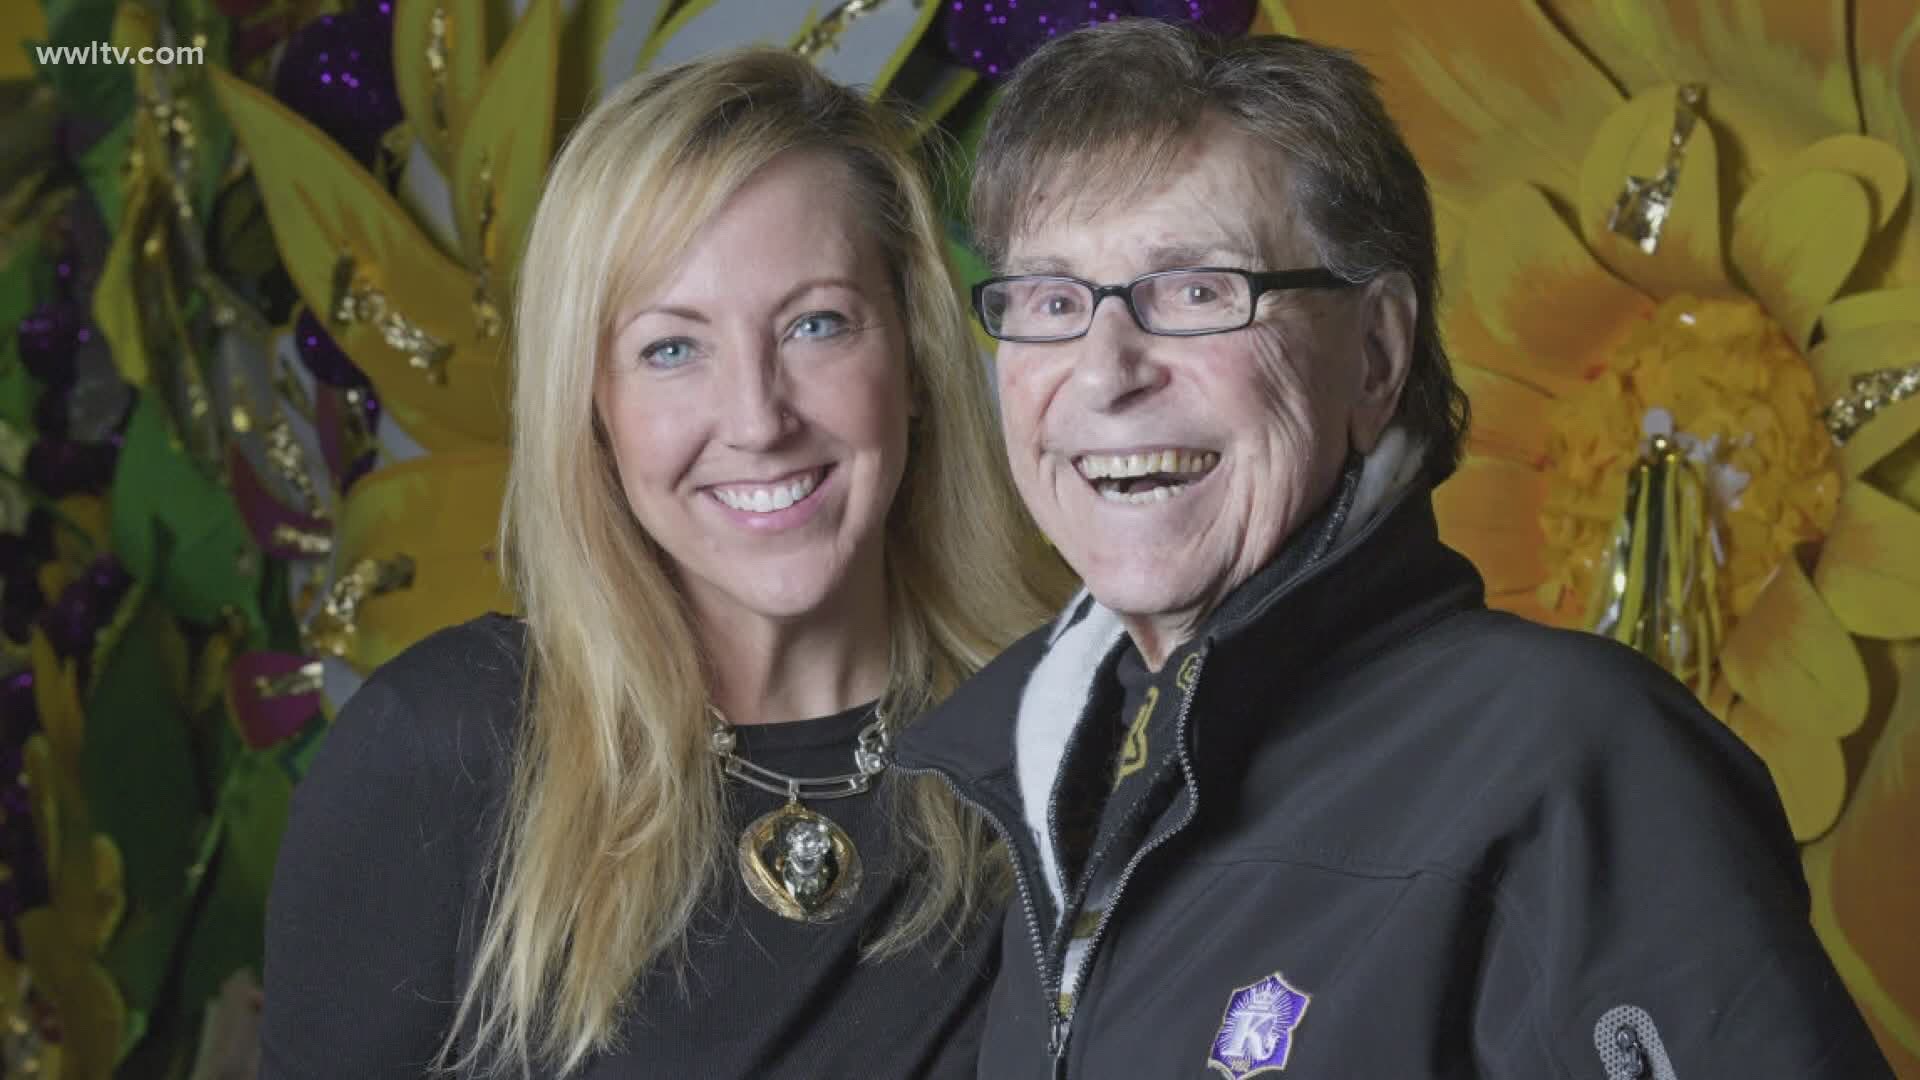 Holly Kern, the wife of the late Blaine Kern Sr., speaks on the WWL-TV Morning Show about the passing of her husband, known as "Mr. Mardi Gras," and his legacy.